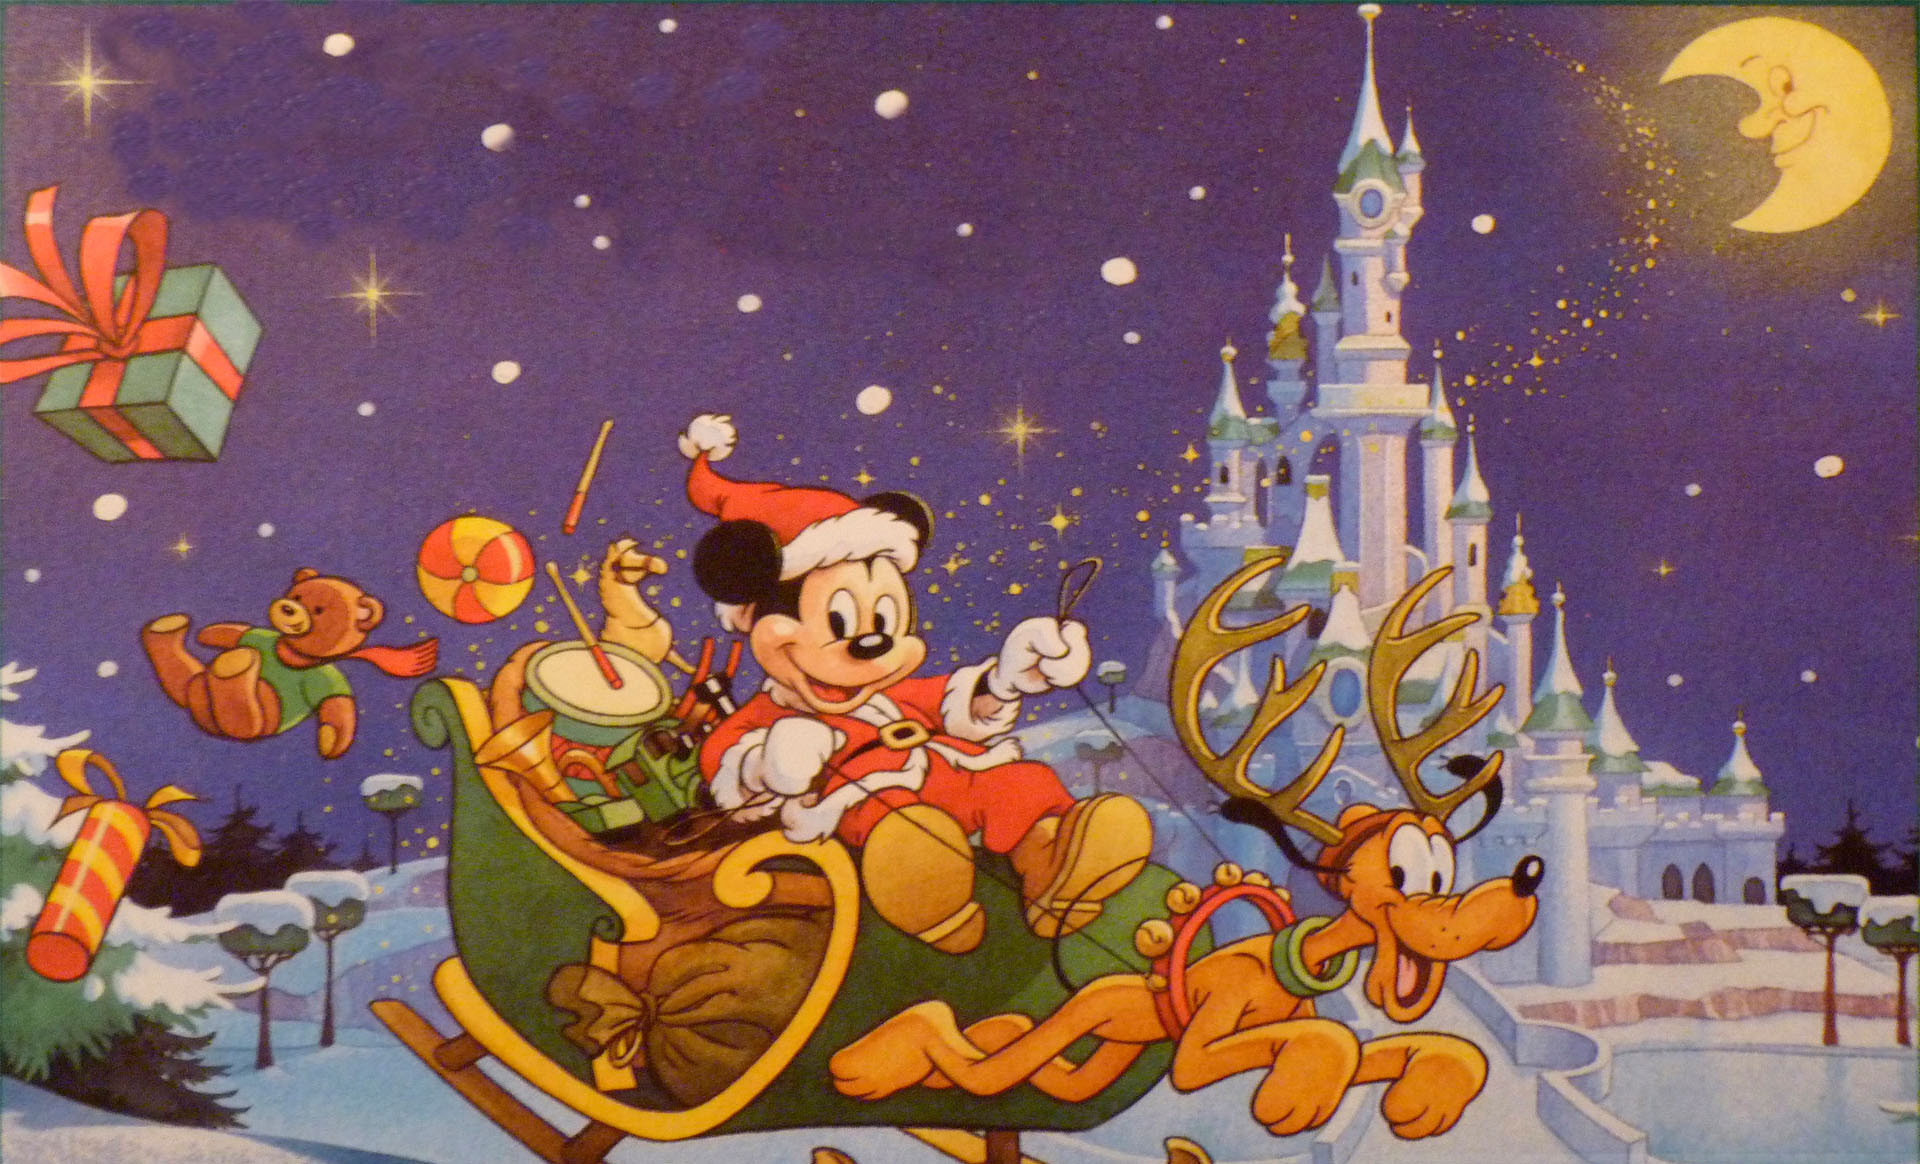 1920x1164 wallpaper.wiki-Disney-micky-at-christmas-night-wallpapers-